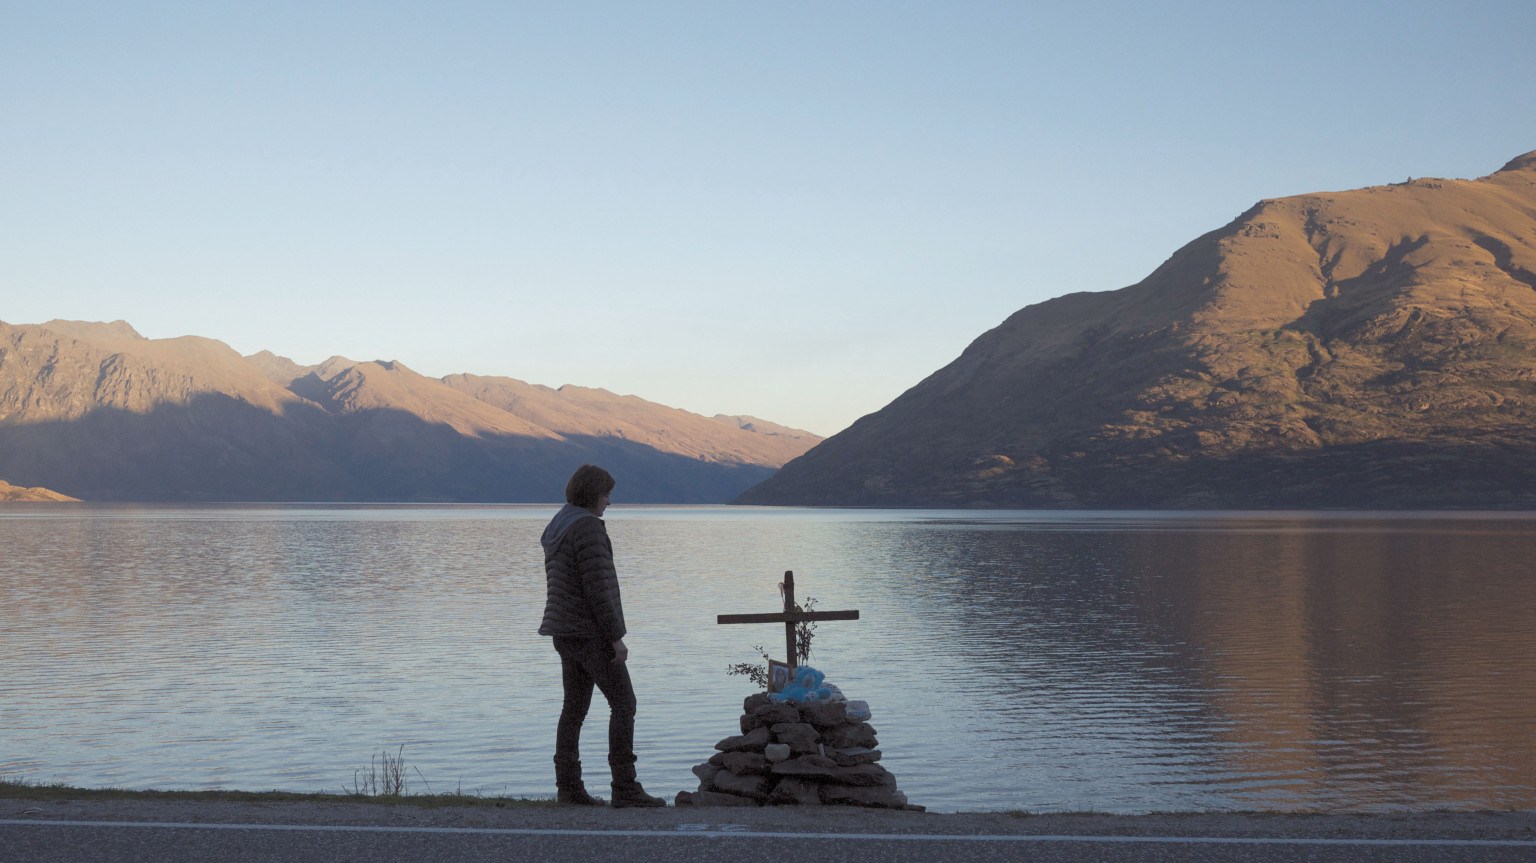 Robin Griffin stands in front of a memorial overlooking a gorgeous lake and mountains in a scene from 'Top of the Lake.'